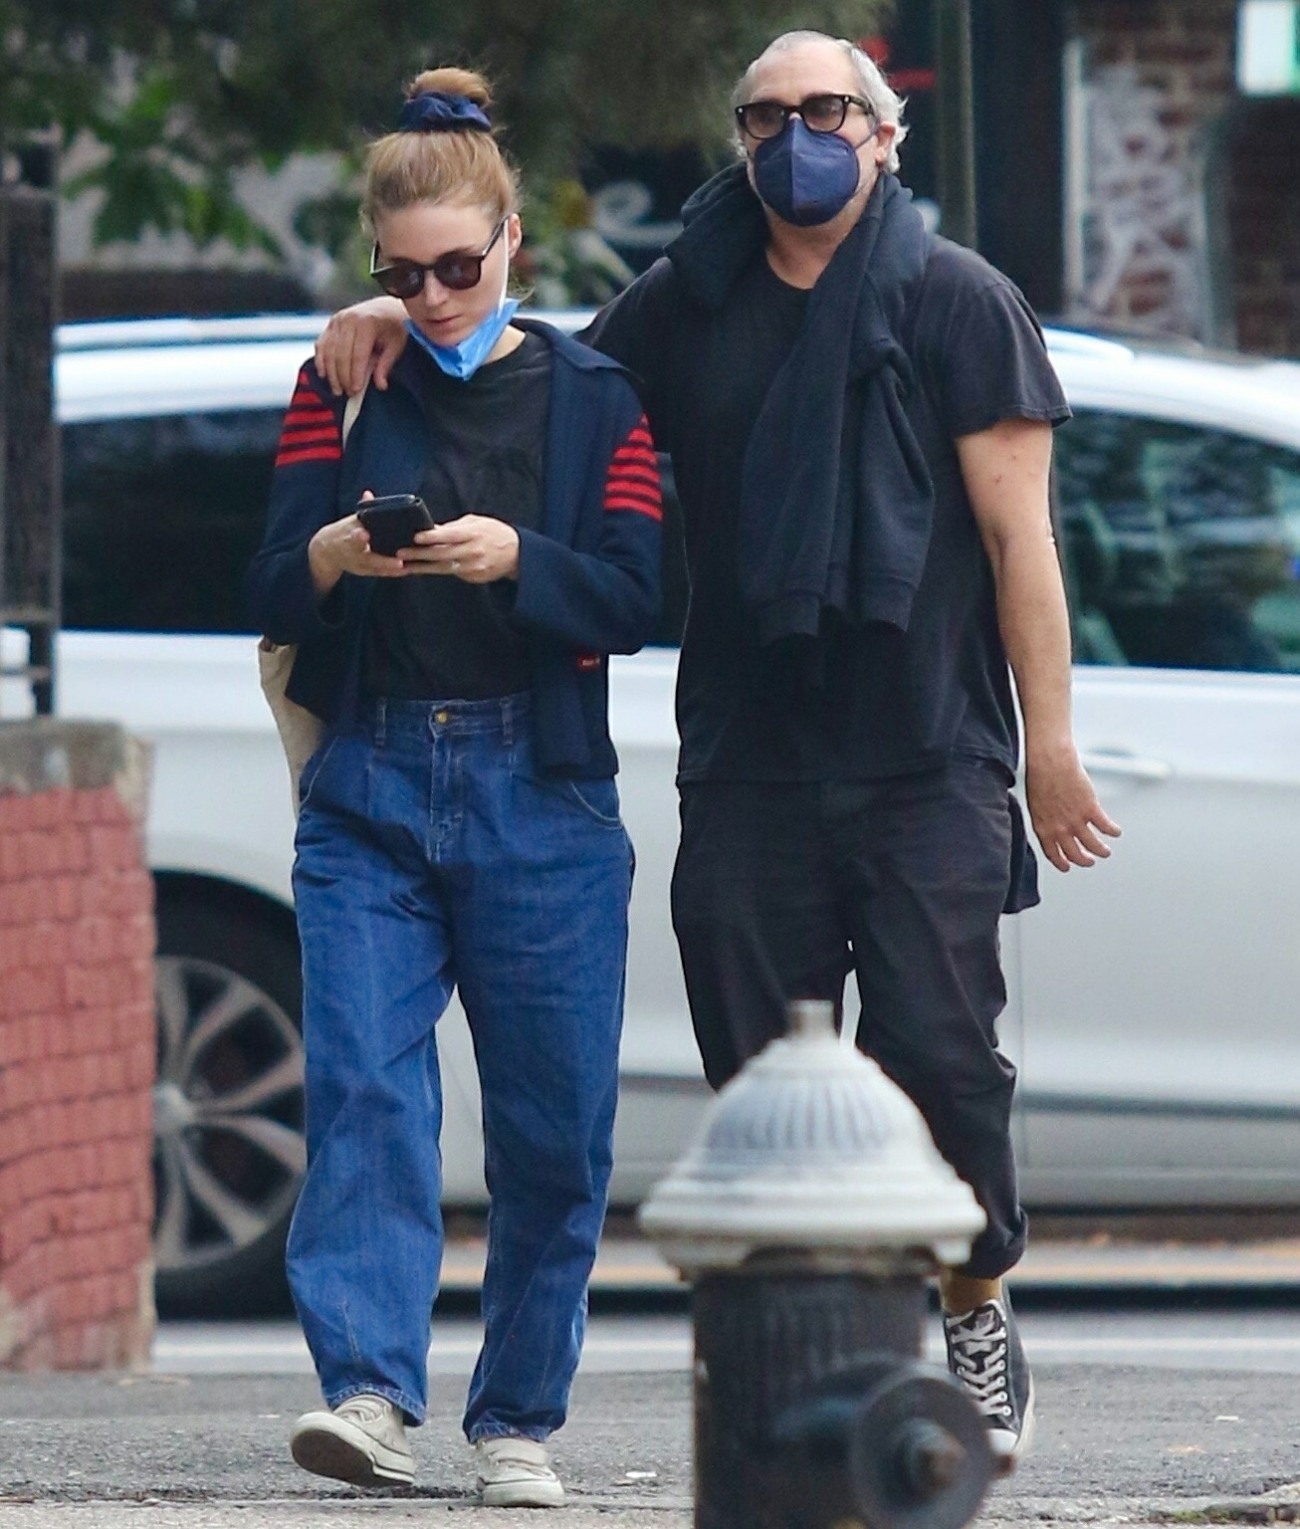 Joaquin Phoenix and Rooney Mara are totally inseparable during stroll in Manhattan